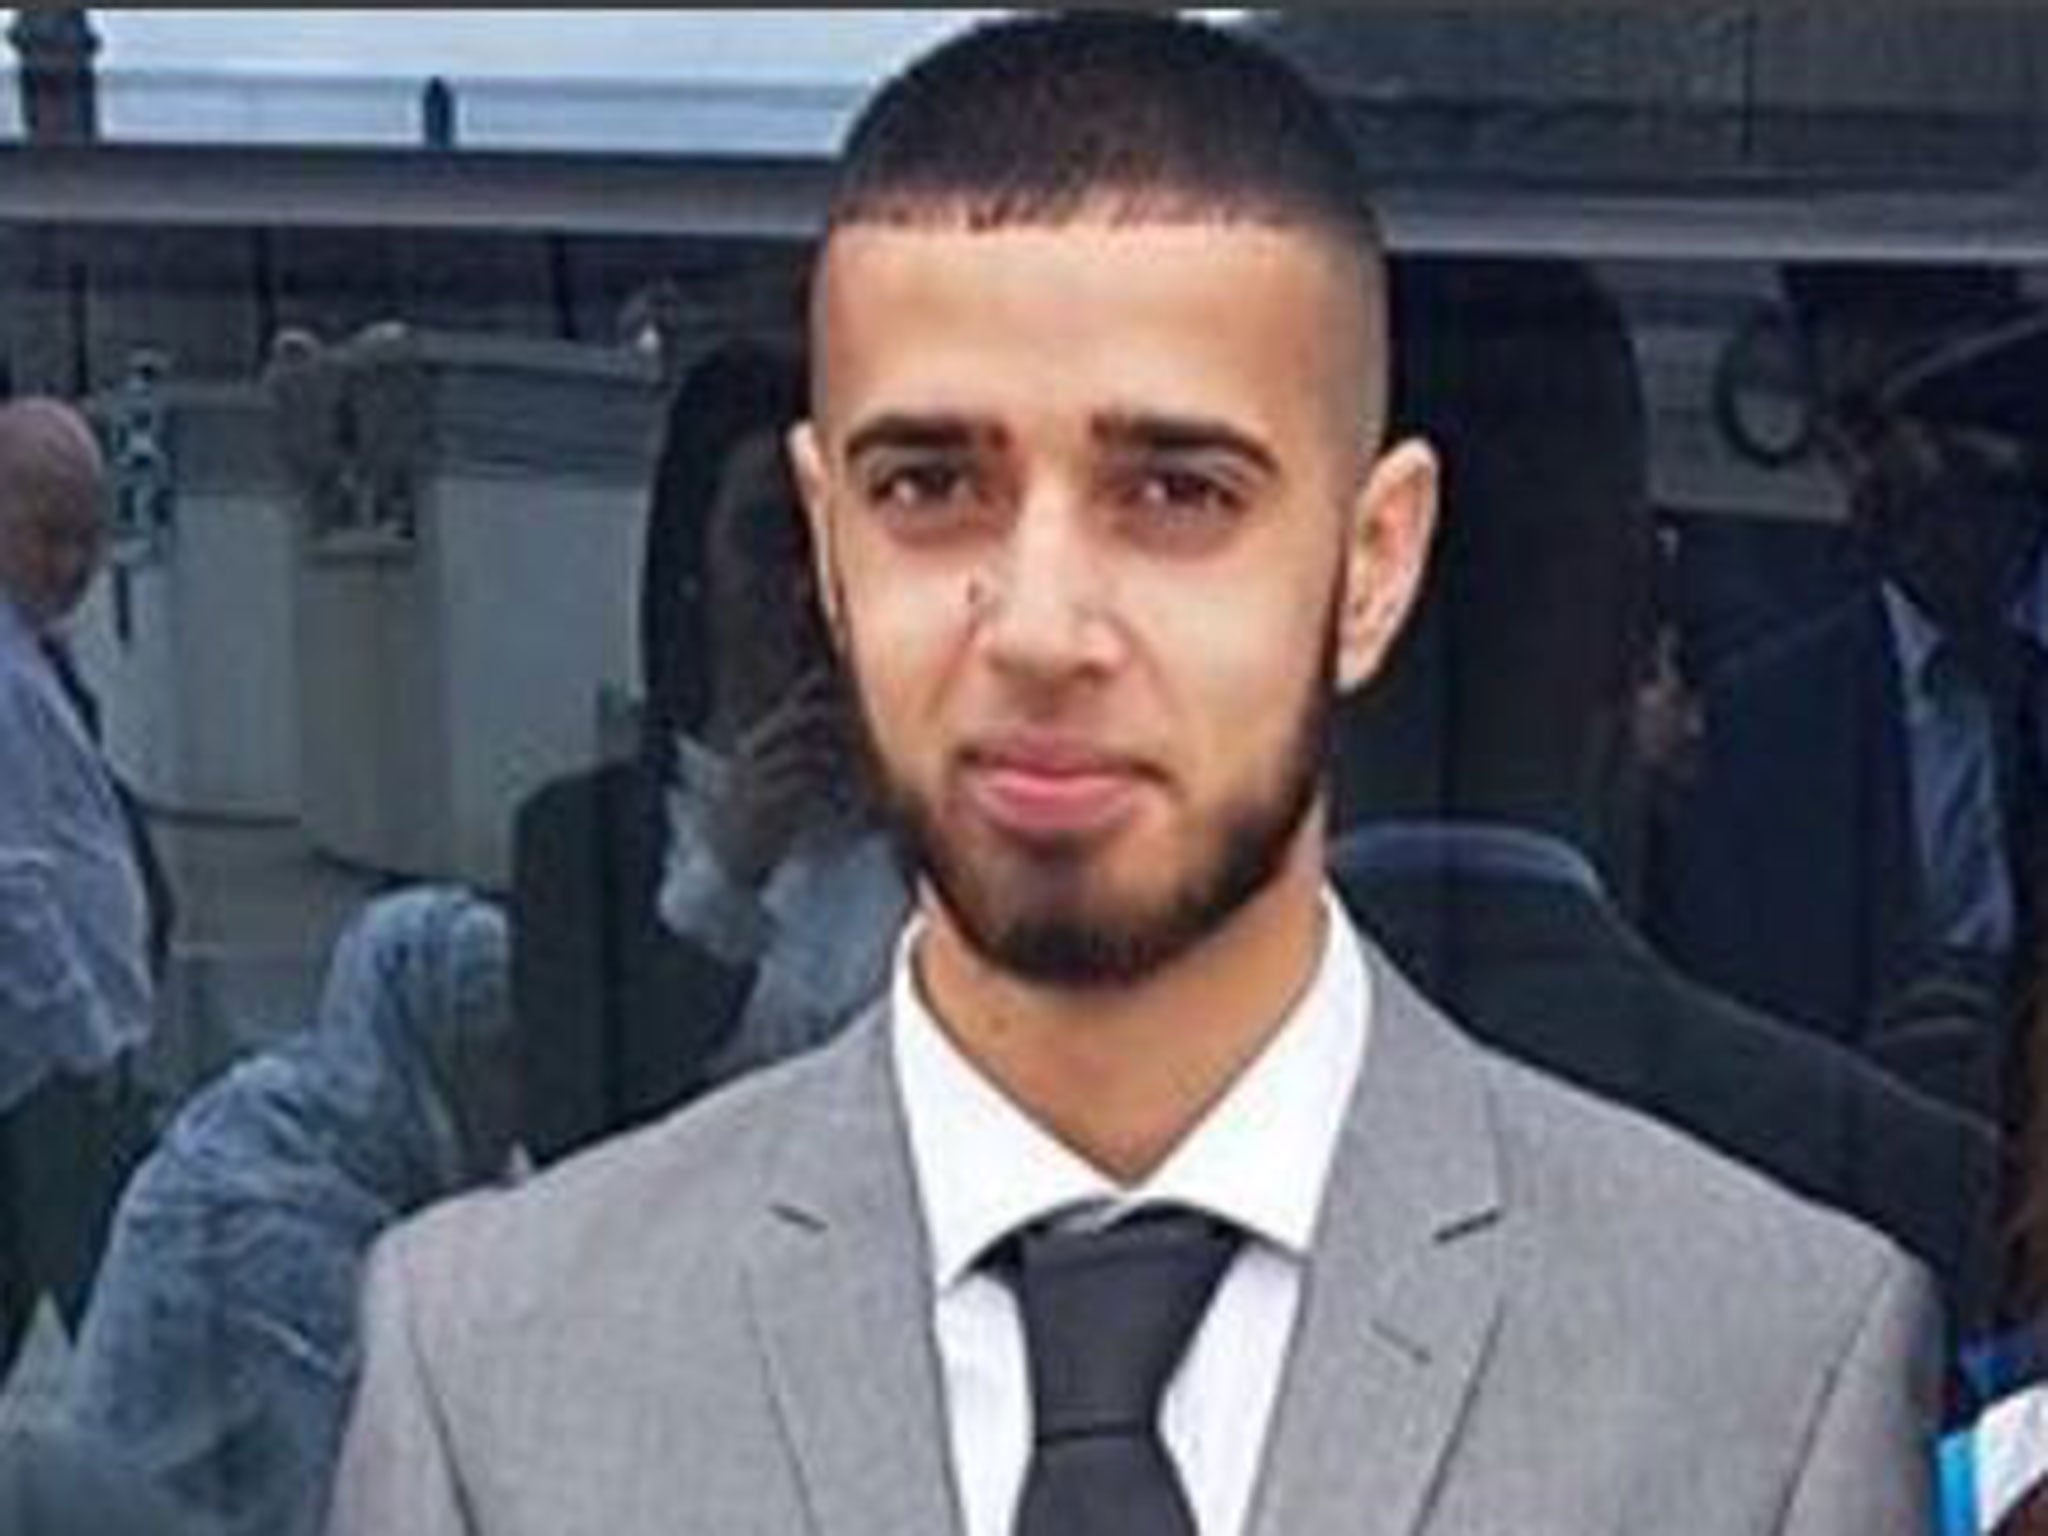 The body of 21-year-old Mohammed Aftab was found in Rochdale on Christmas Day